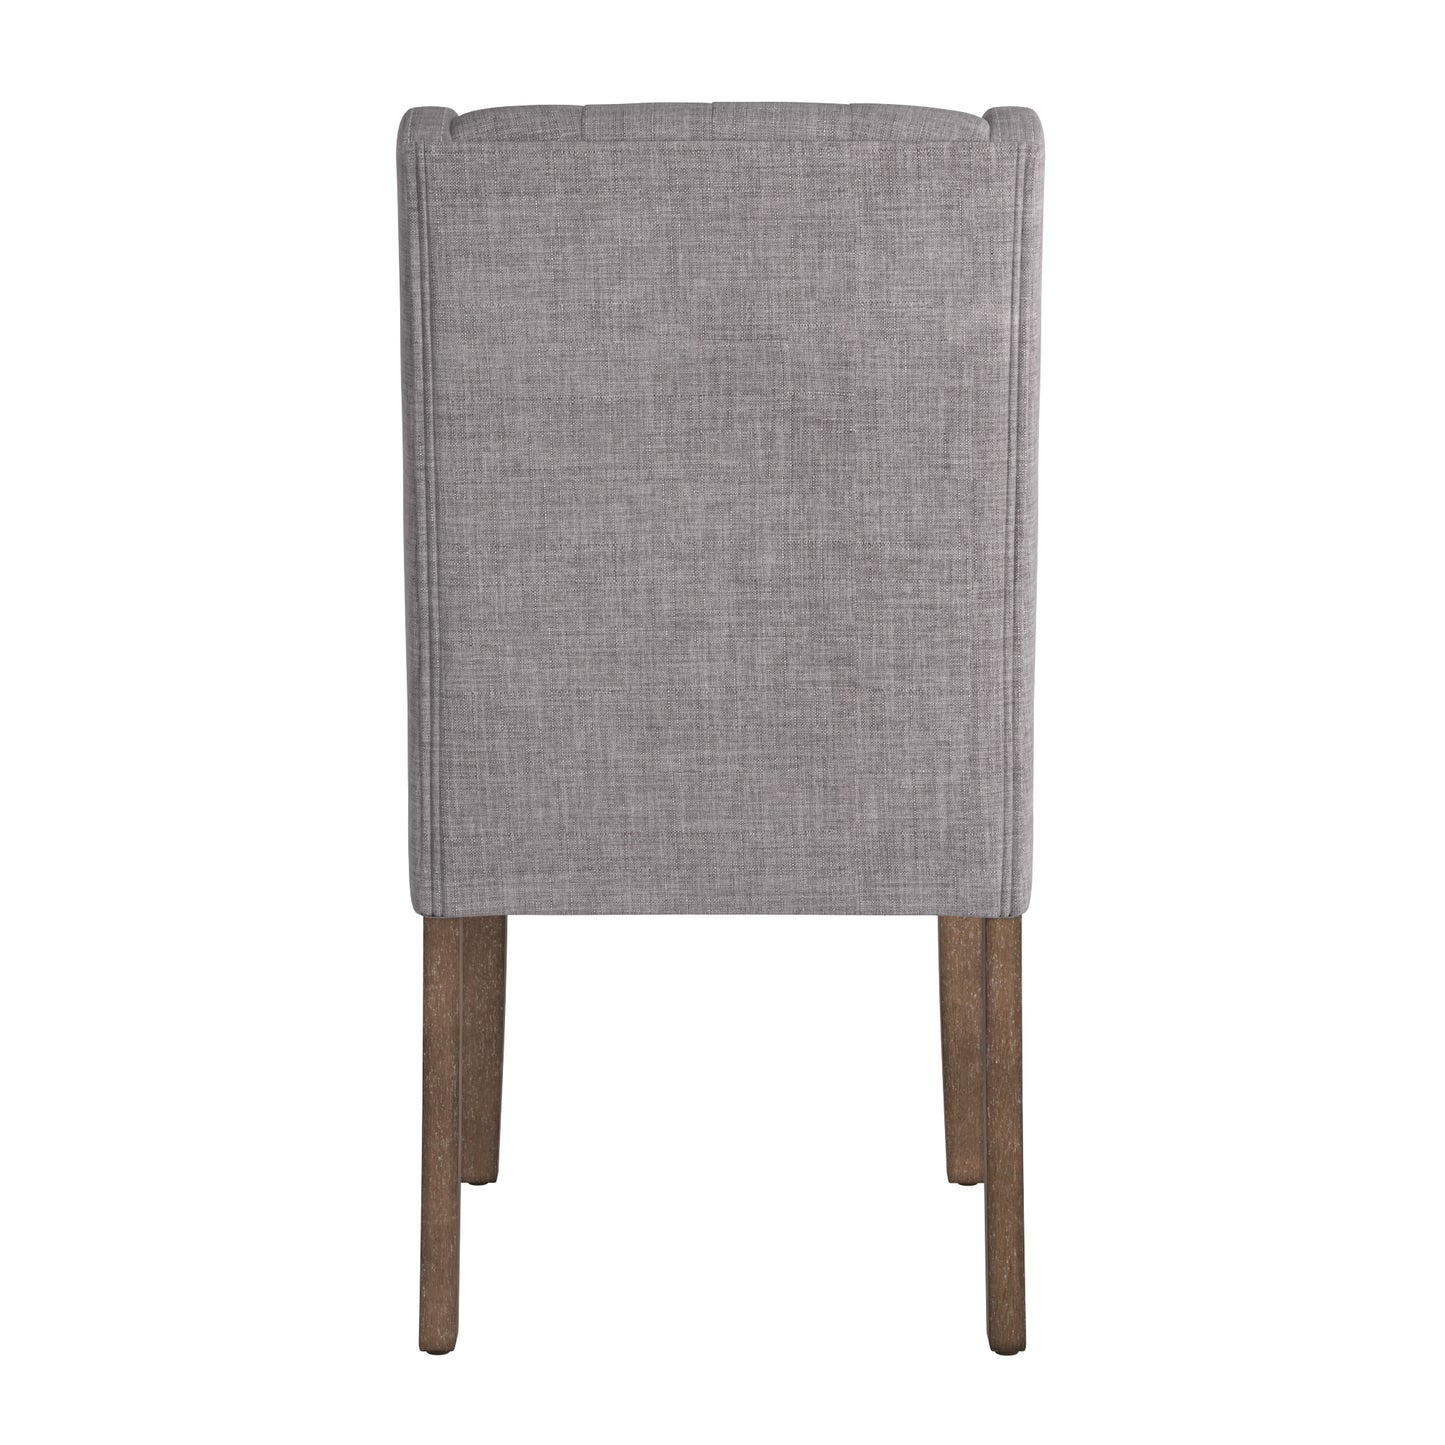 Tufted Wingback Hostess Chairs (Set of 2) - Grey Linen